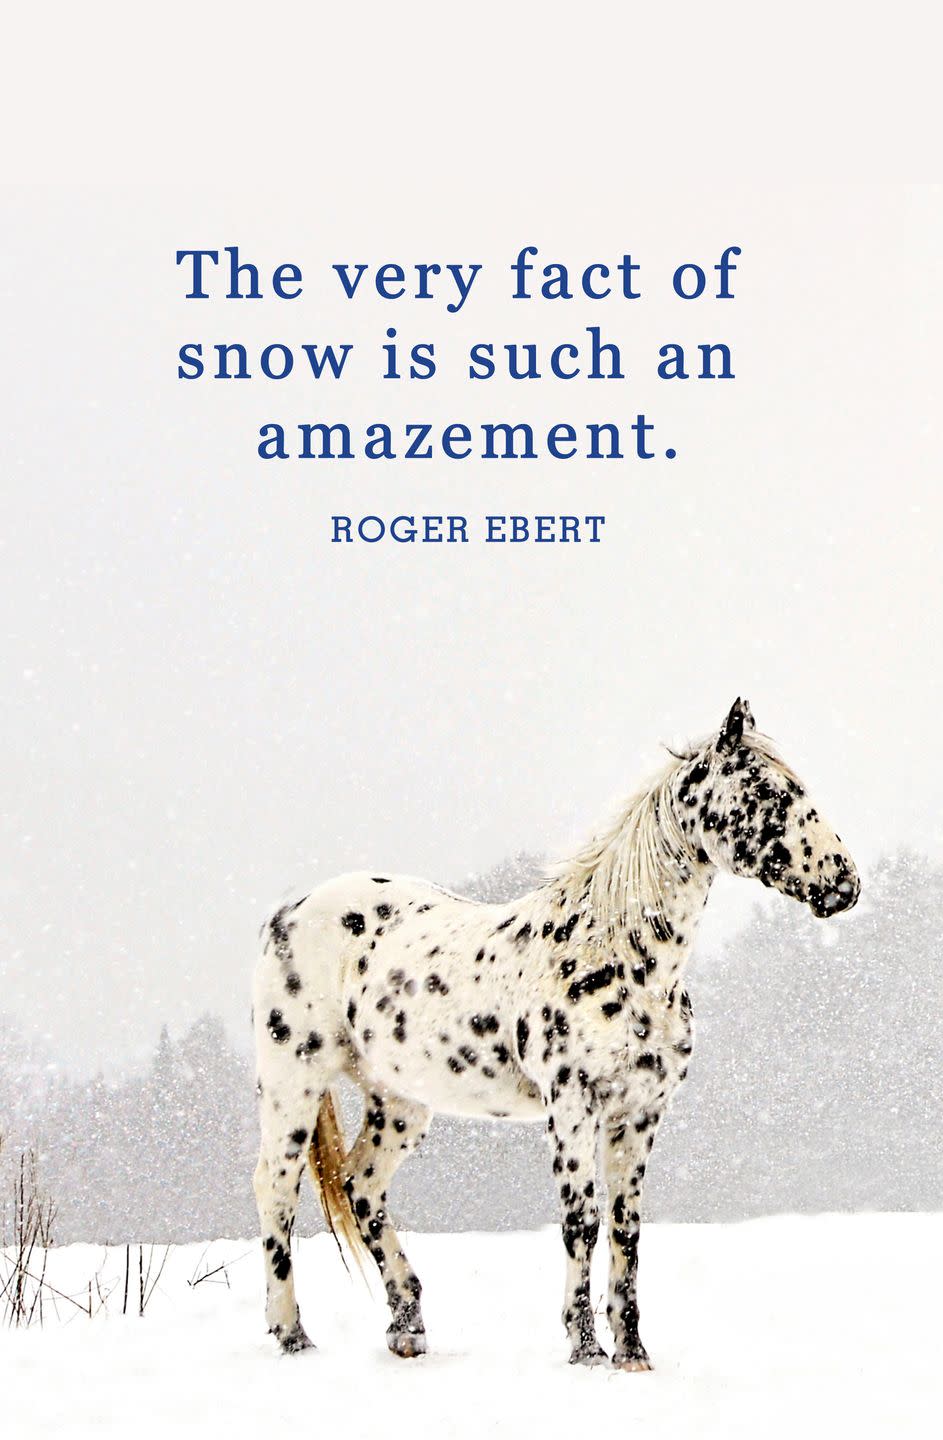 <p>"The very fact of snow is such an amazement."</p>